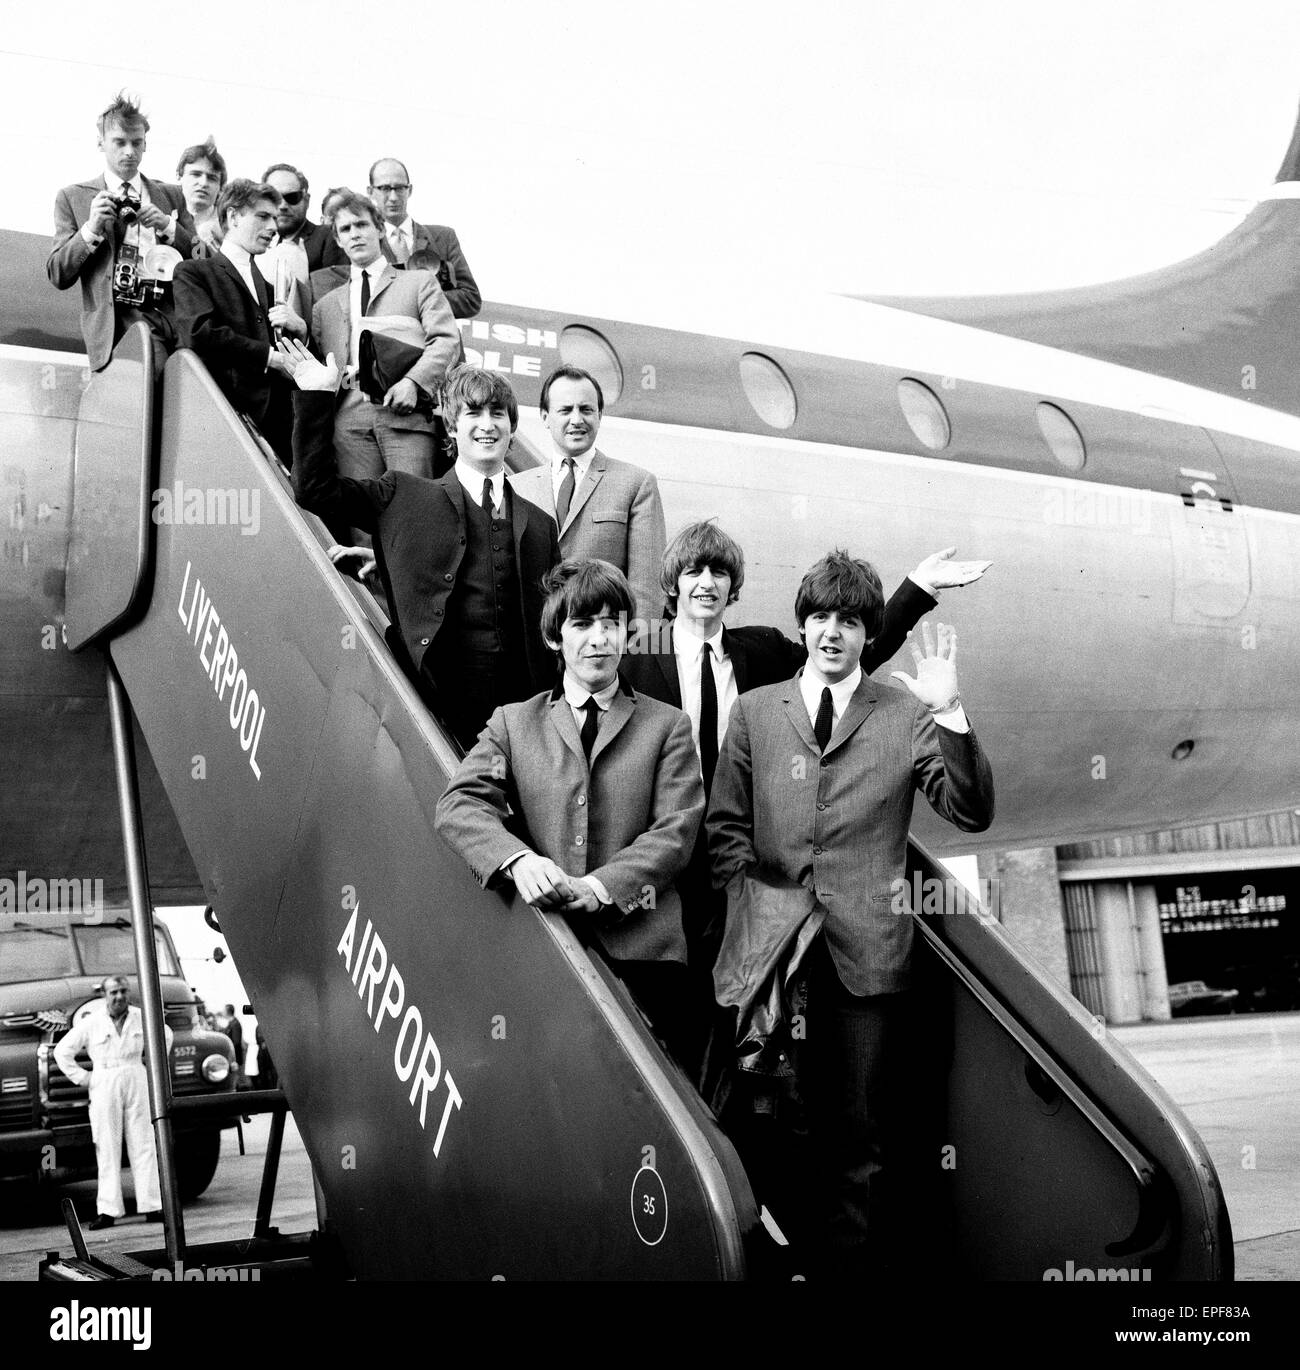 Northern premier of The Beatles film 'A Hard Day's Night'. John Lennon, Paul McCartney, Ringo Starr and George Harrison pictured on the steps of the plane in Liverpool on 10th July 1964. Stock Photo